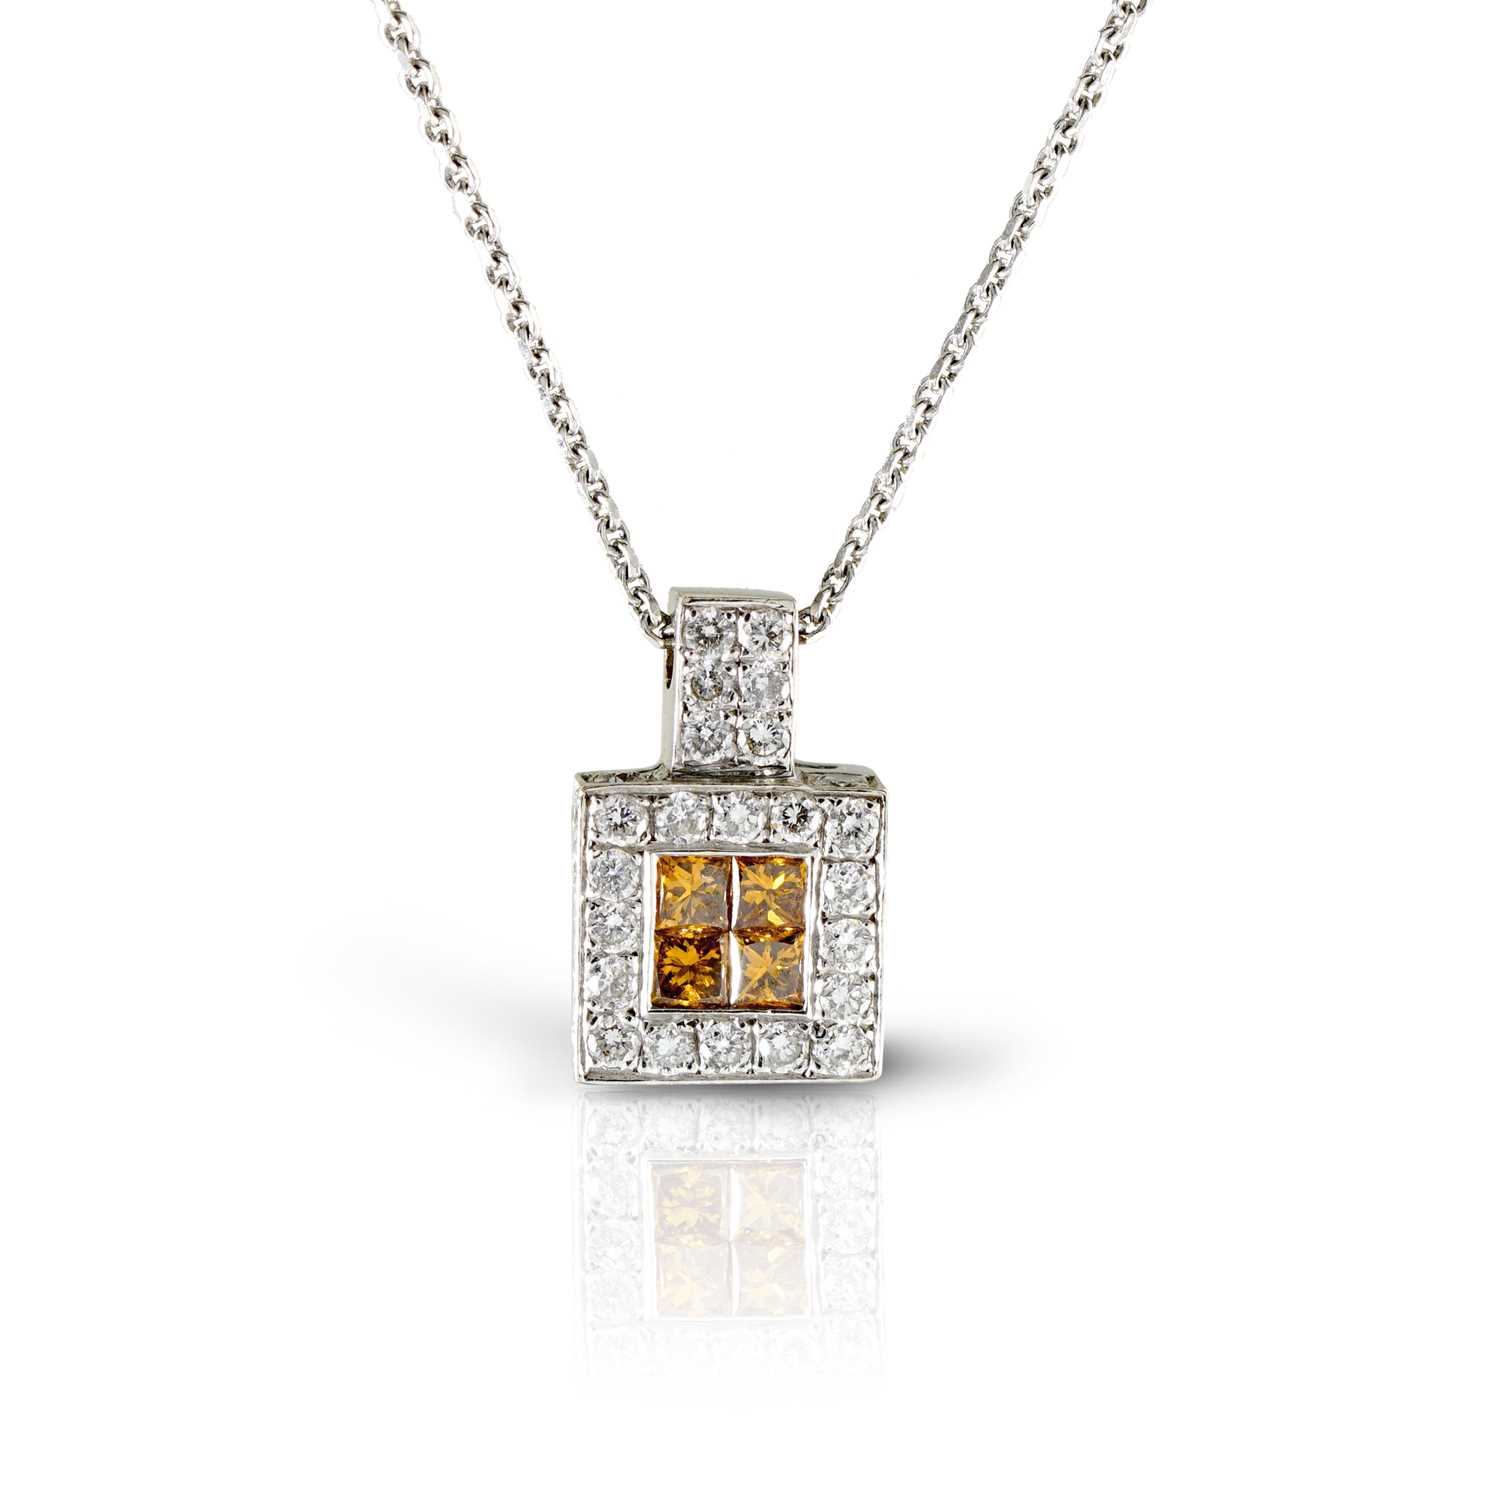 Lot 555 - Gold Pendant with Fancy Diamonds on Gold Necklace